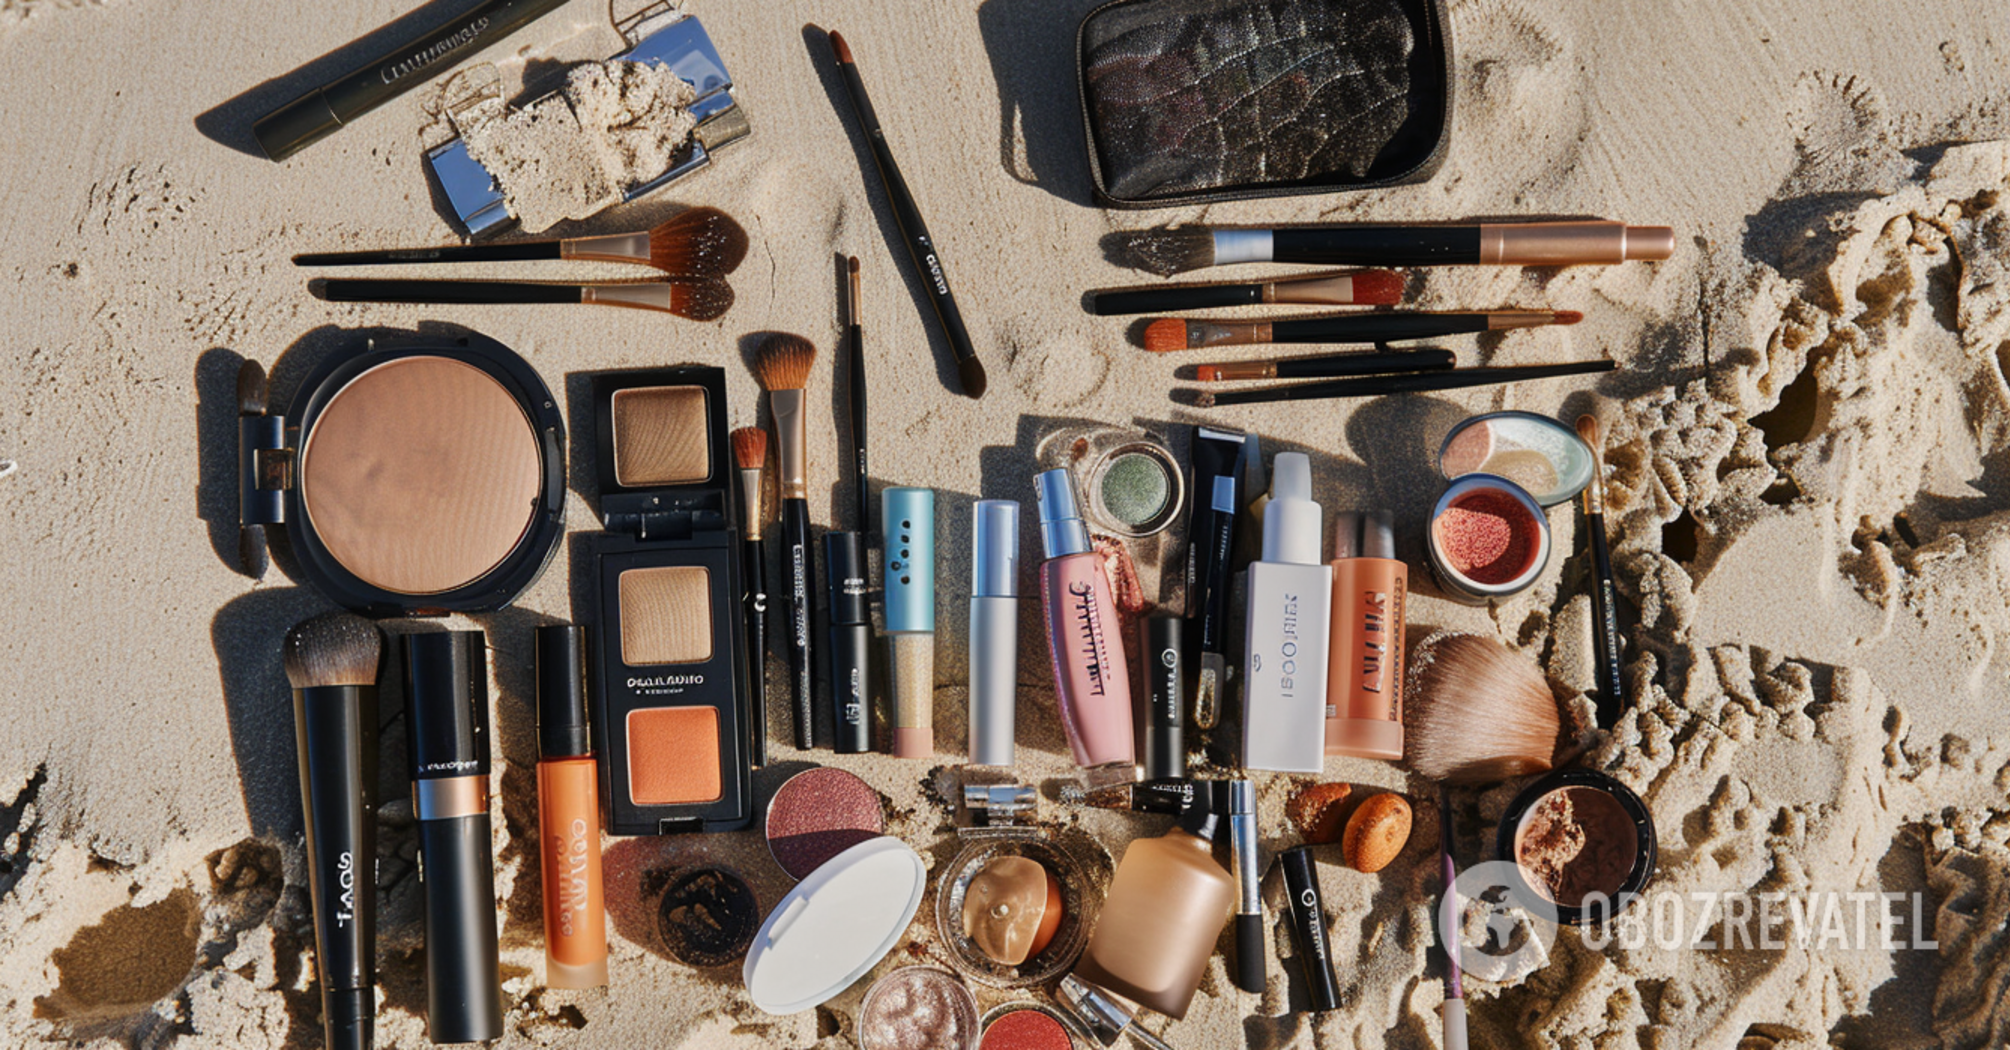 Will last all day long: best makeup tips for hot days